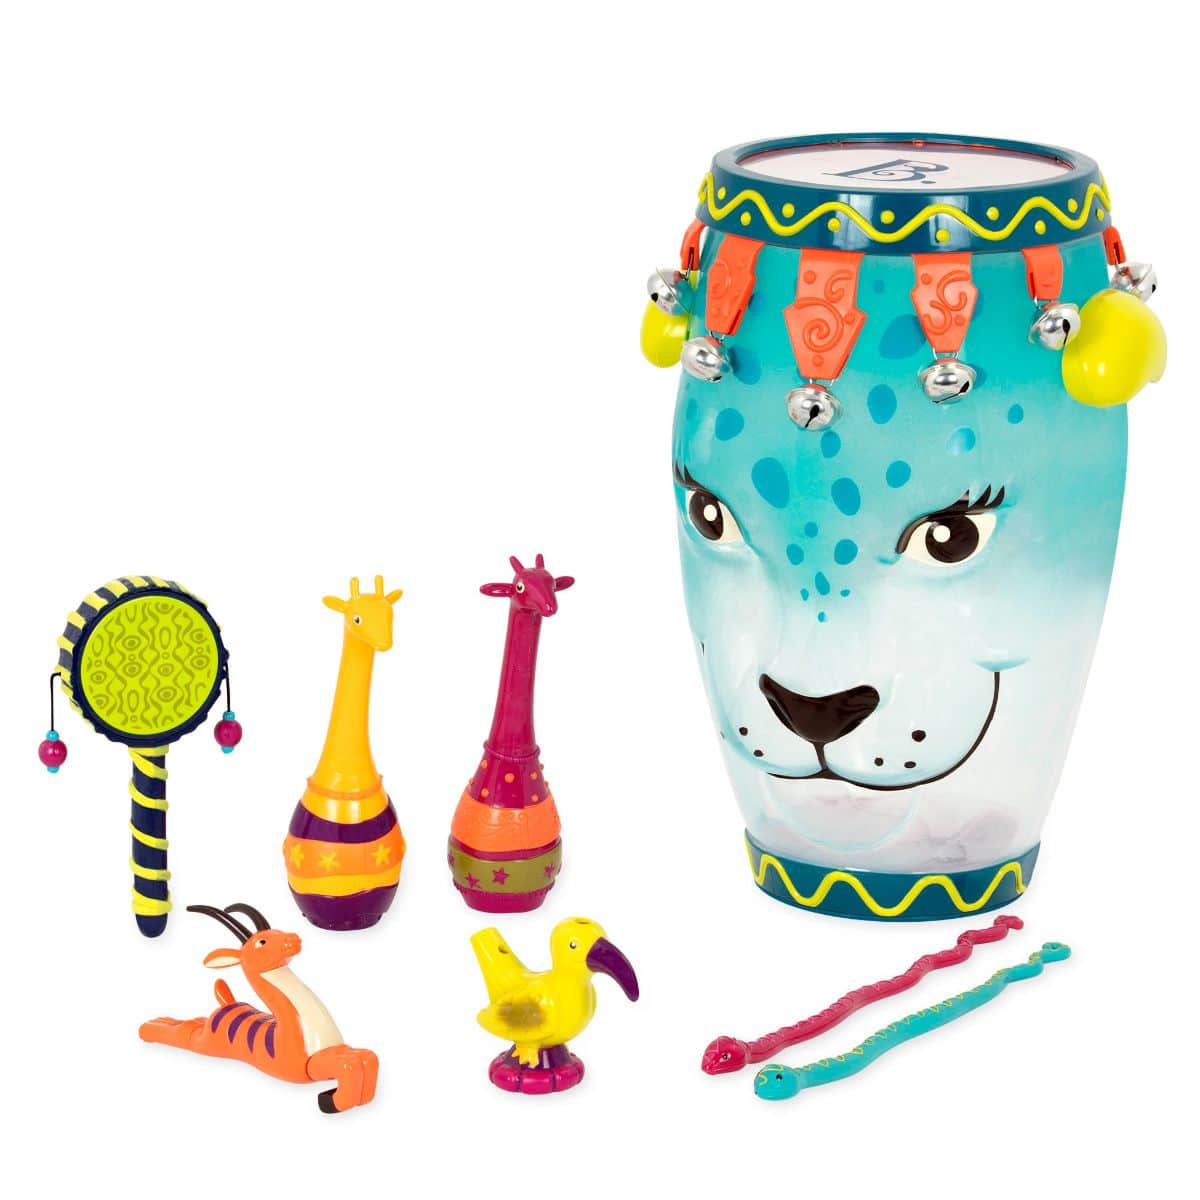 Jungle-themed musical instruments and leopard drum.